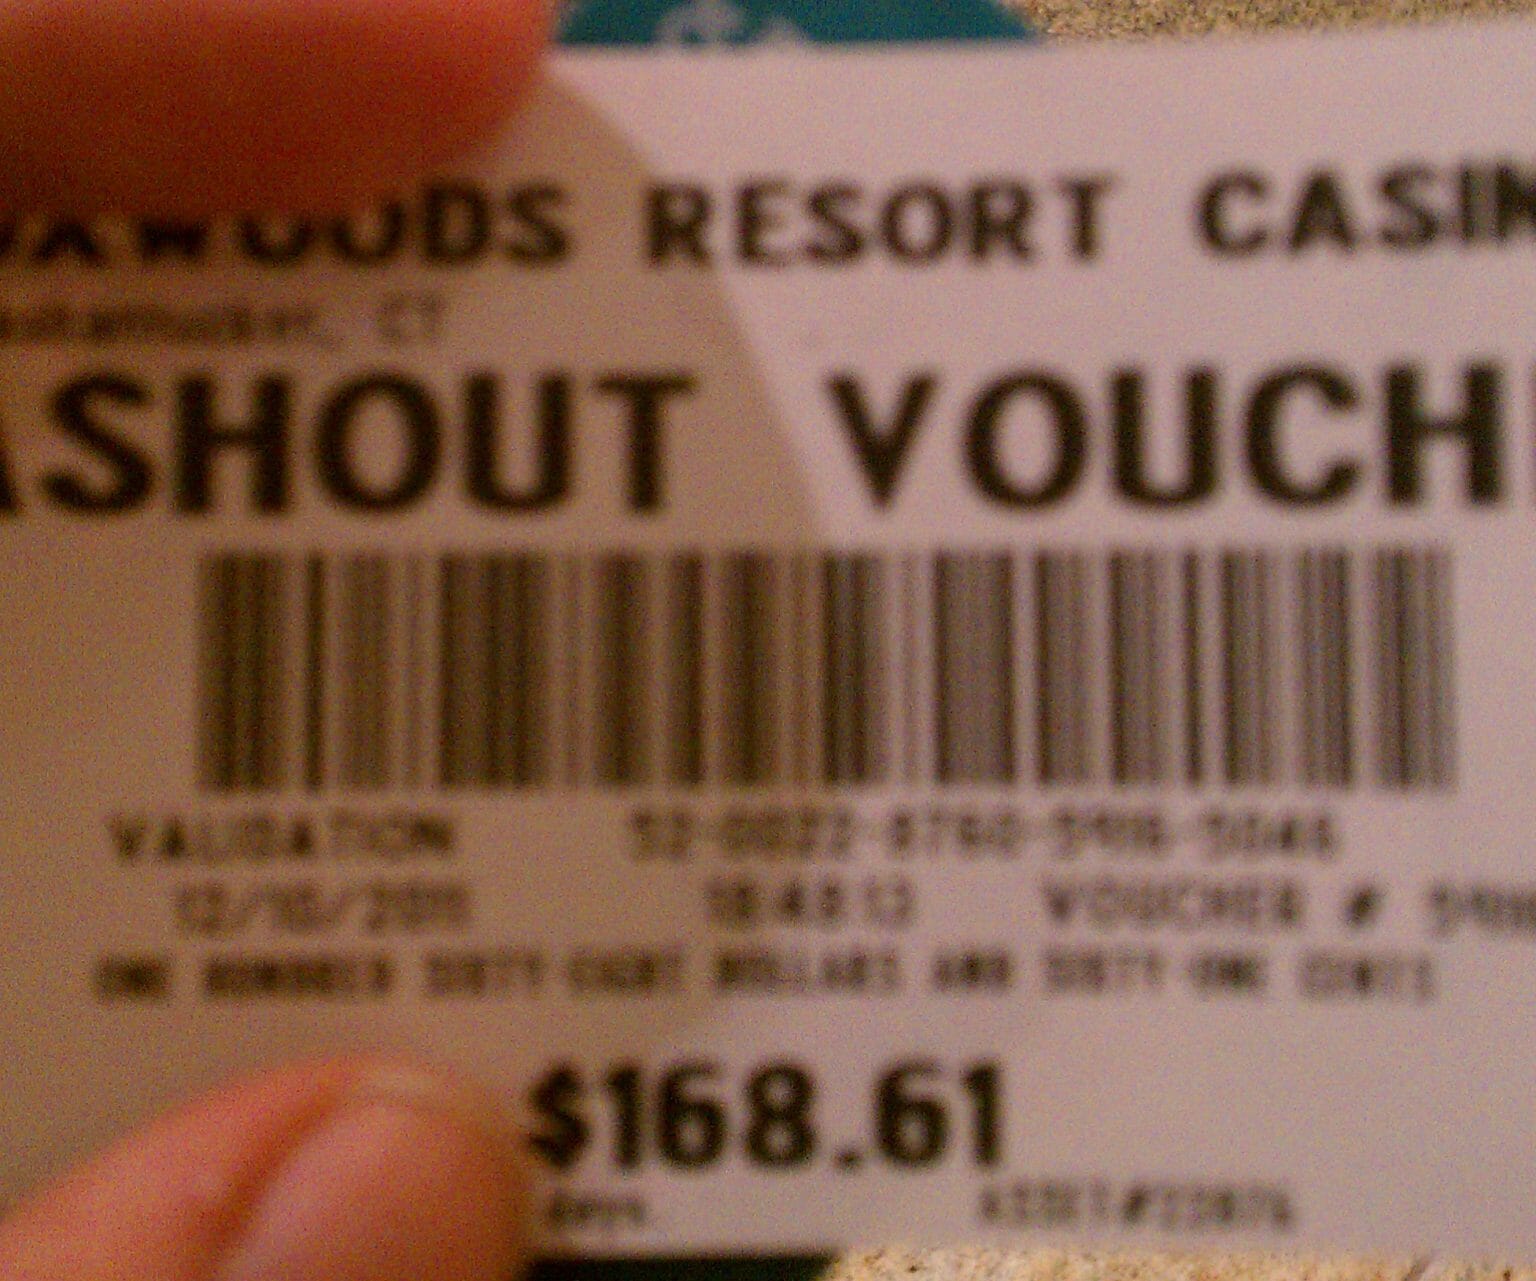 how to check cashout voucher for slot machine